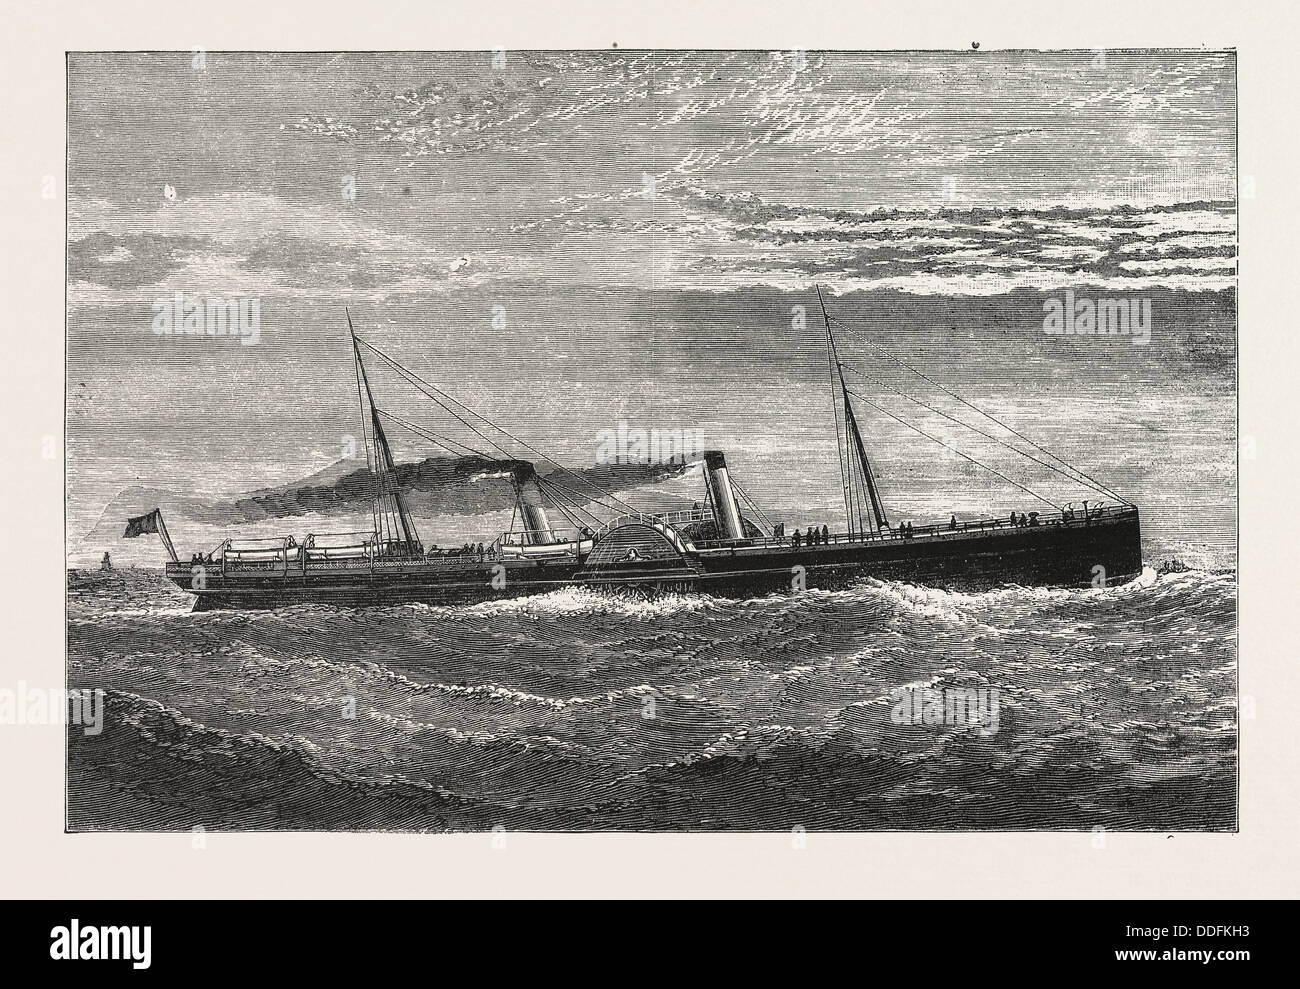 LONDON AND NORTH WESTERN RAILWAY COMPANY's  NEW STEAMER SHAMROCK, ENGRAVING 1876 Stock Photo